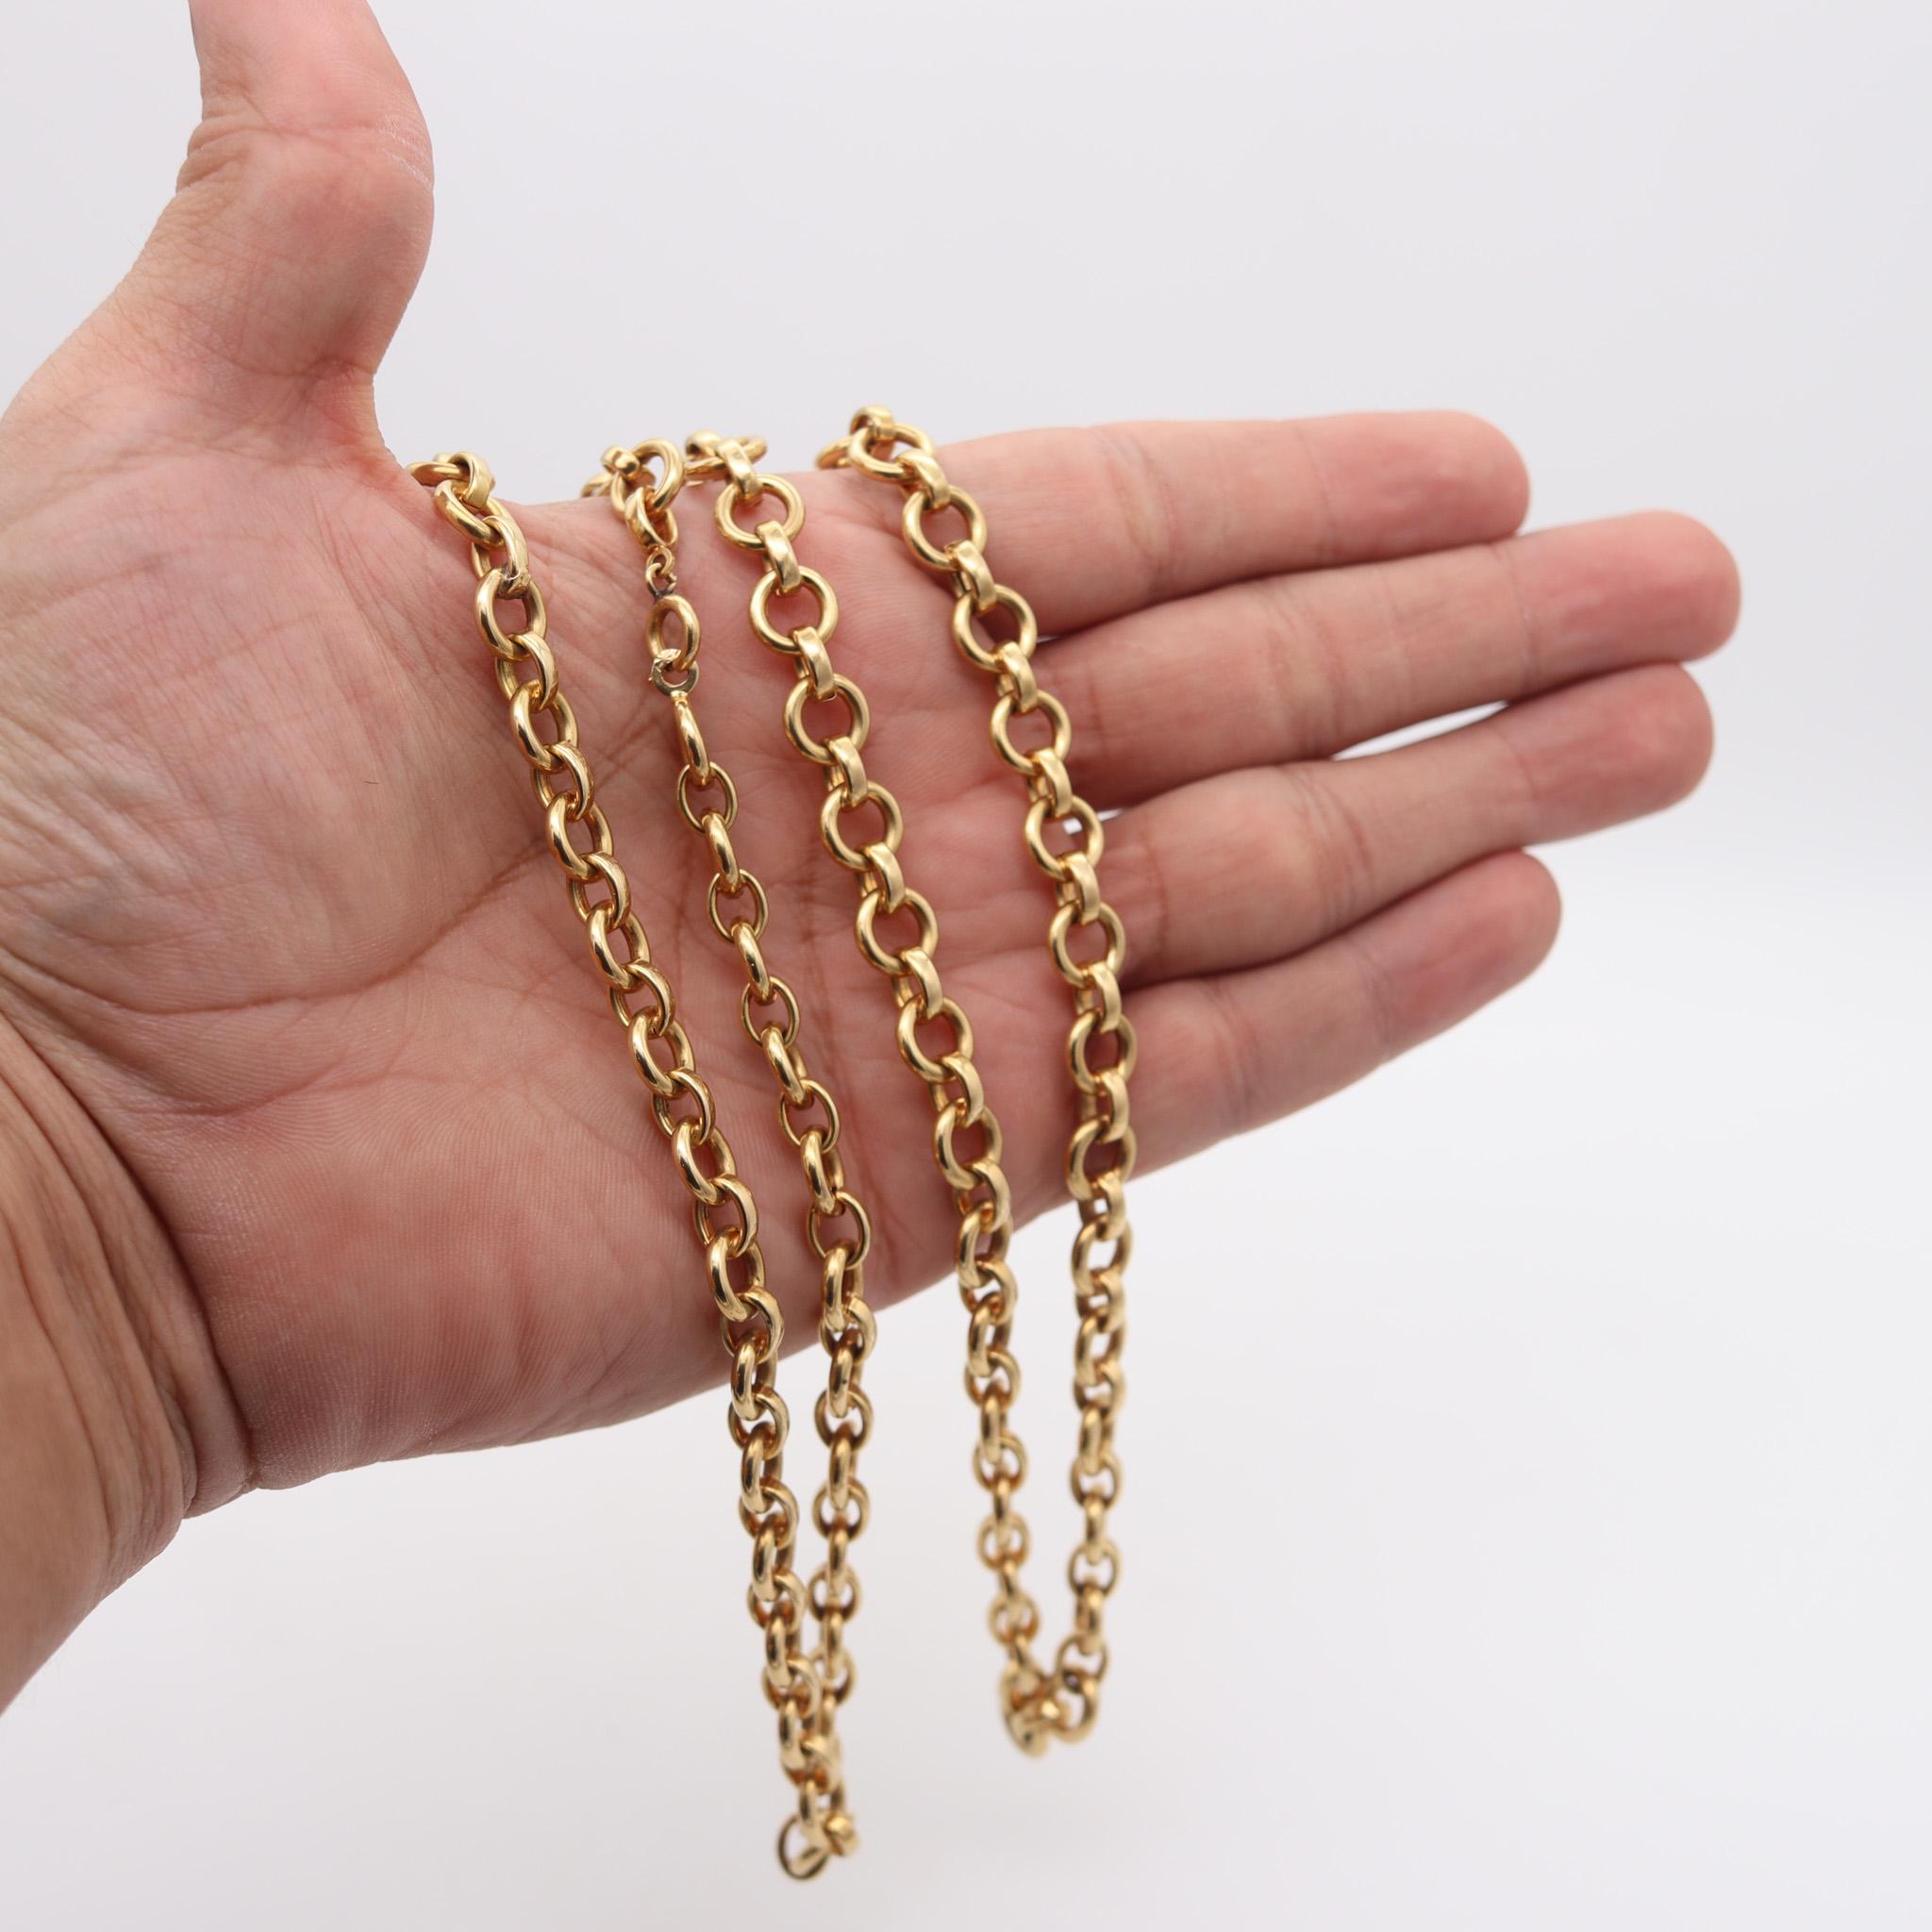 Bruno Dal Lago 1970 Vicenza Modernist Links Chain In Polished 18Kt Yellow Gold For Sale 3